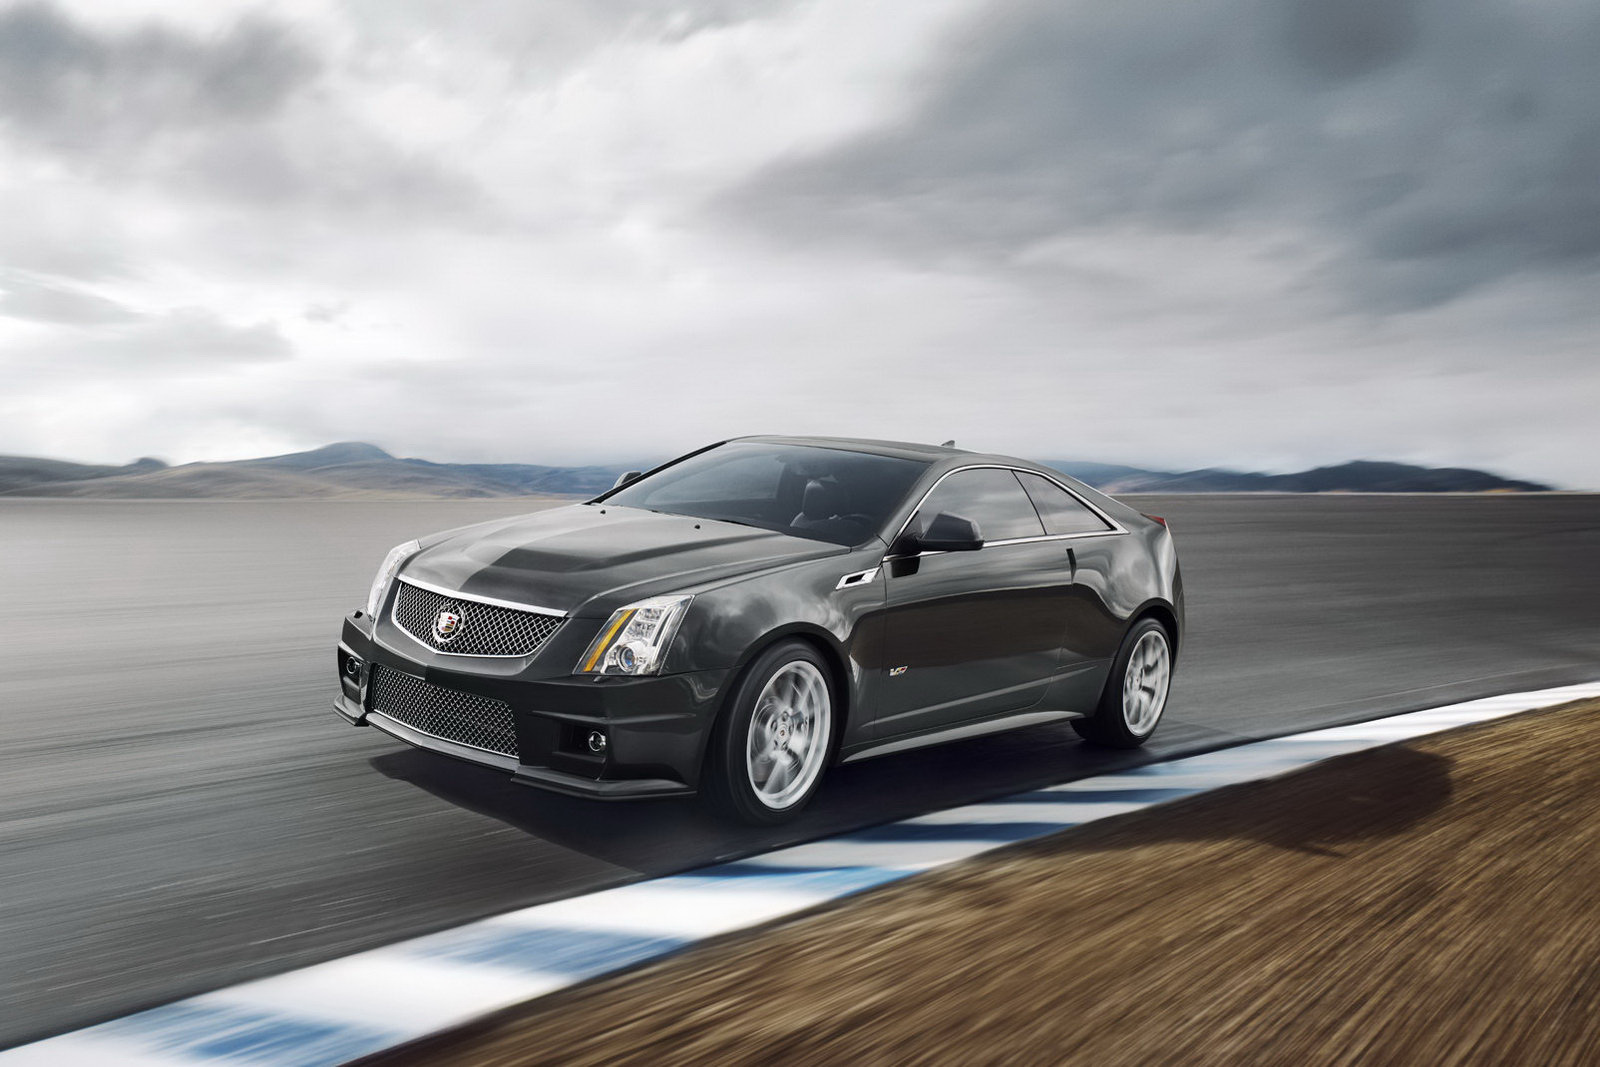 Auto Cars 2011 2012: 2011 Cadillac CTS Coupe Starts from $38,990, 556HP